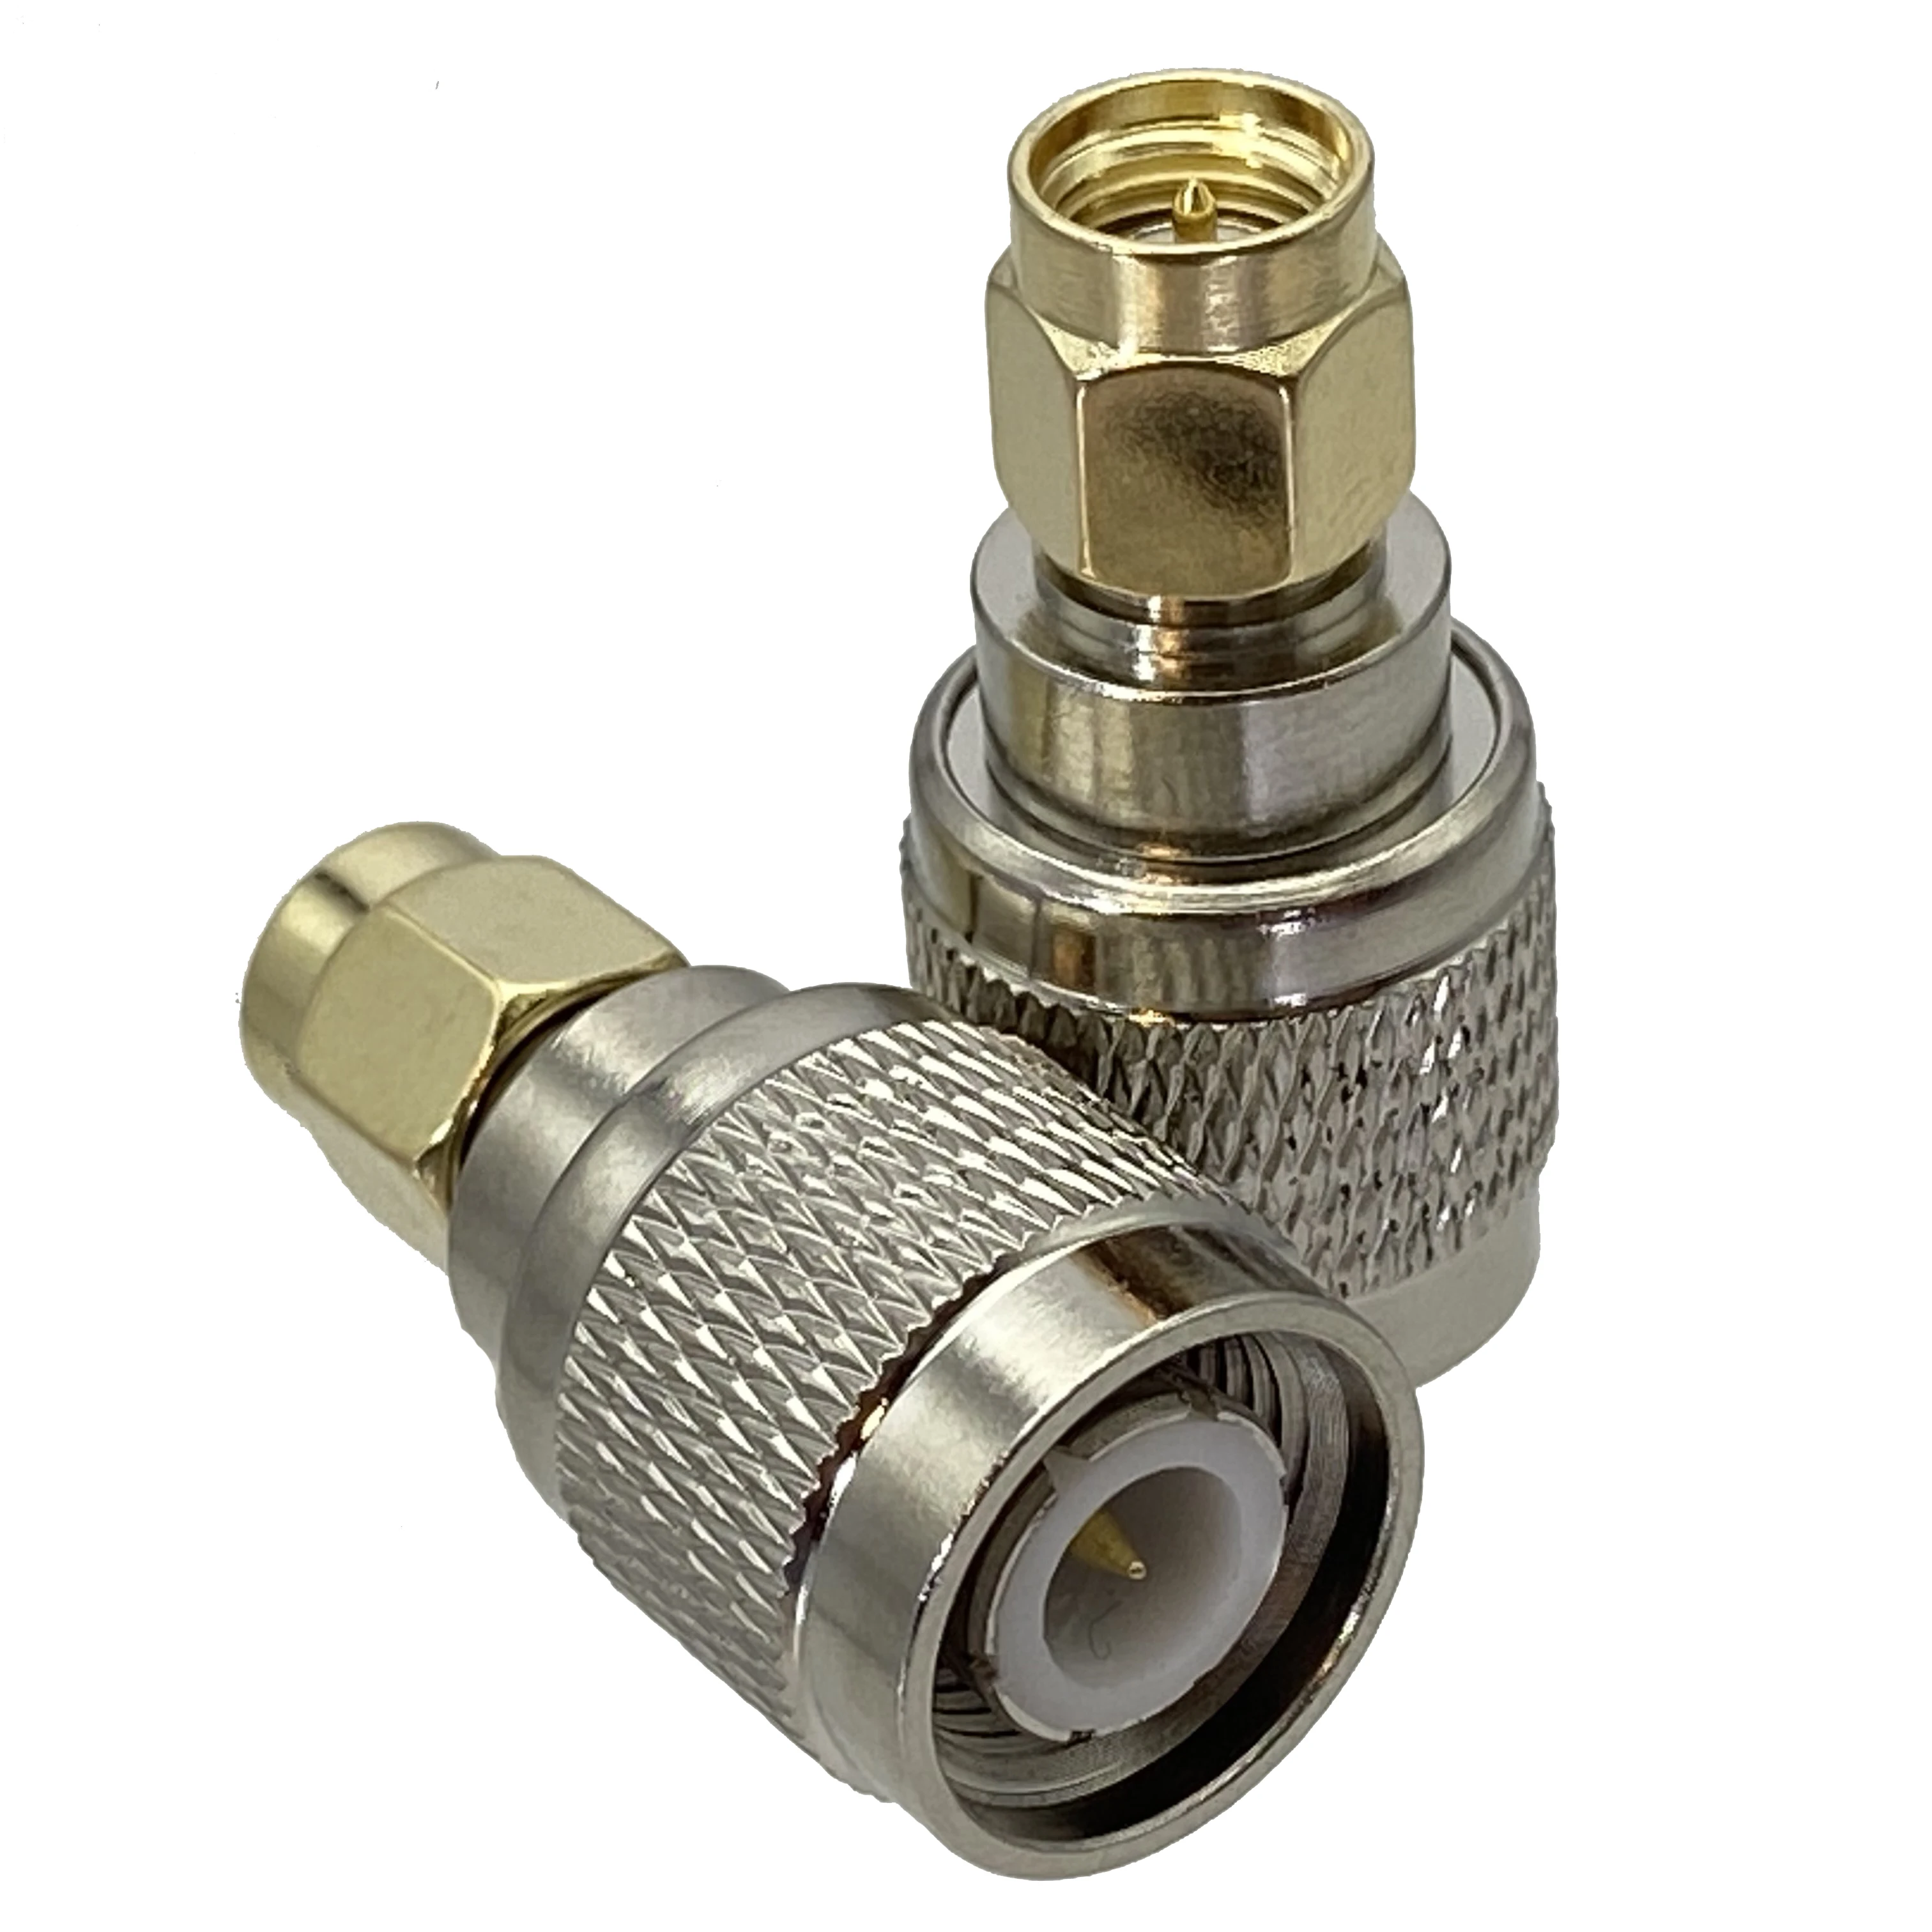 1pcs-tnc-male-plug-to-sma-male-plug-rf-coaxial-adapter-connector-wire-terminals-50ohm